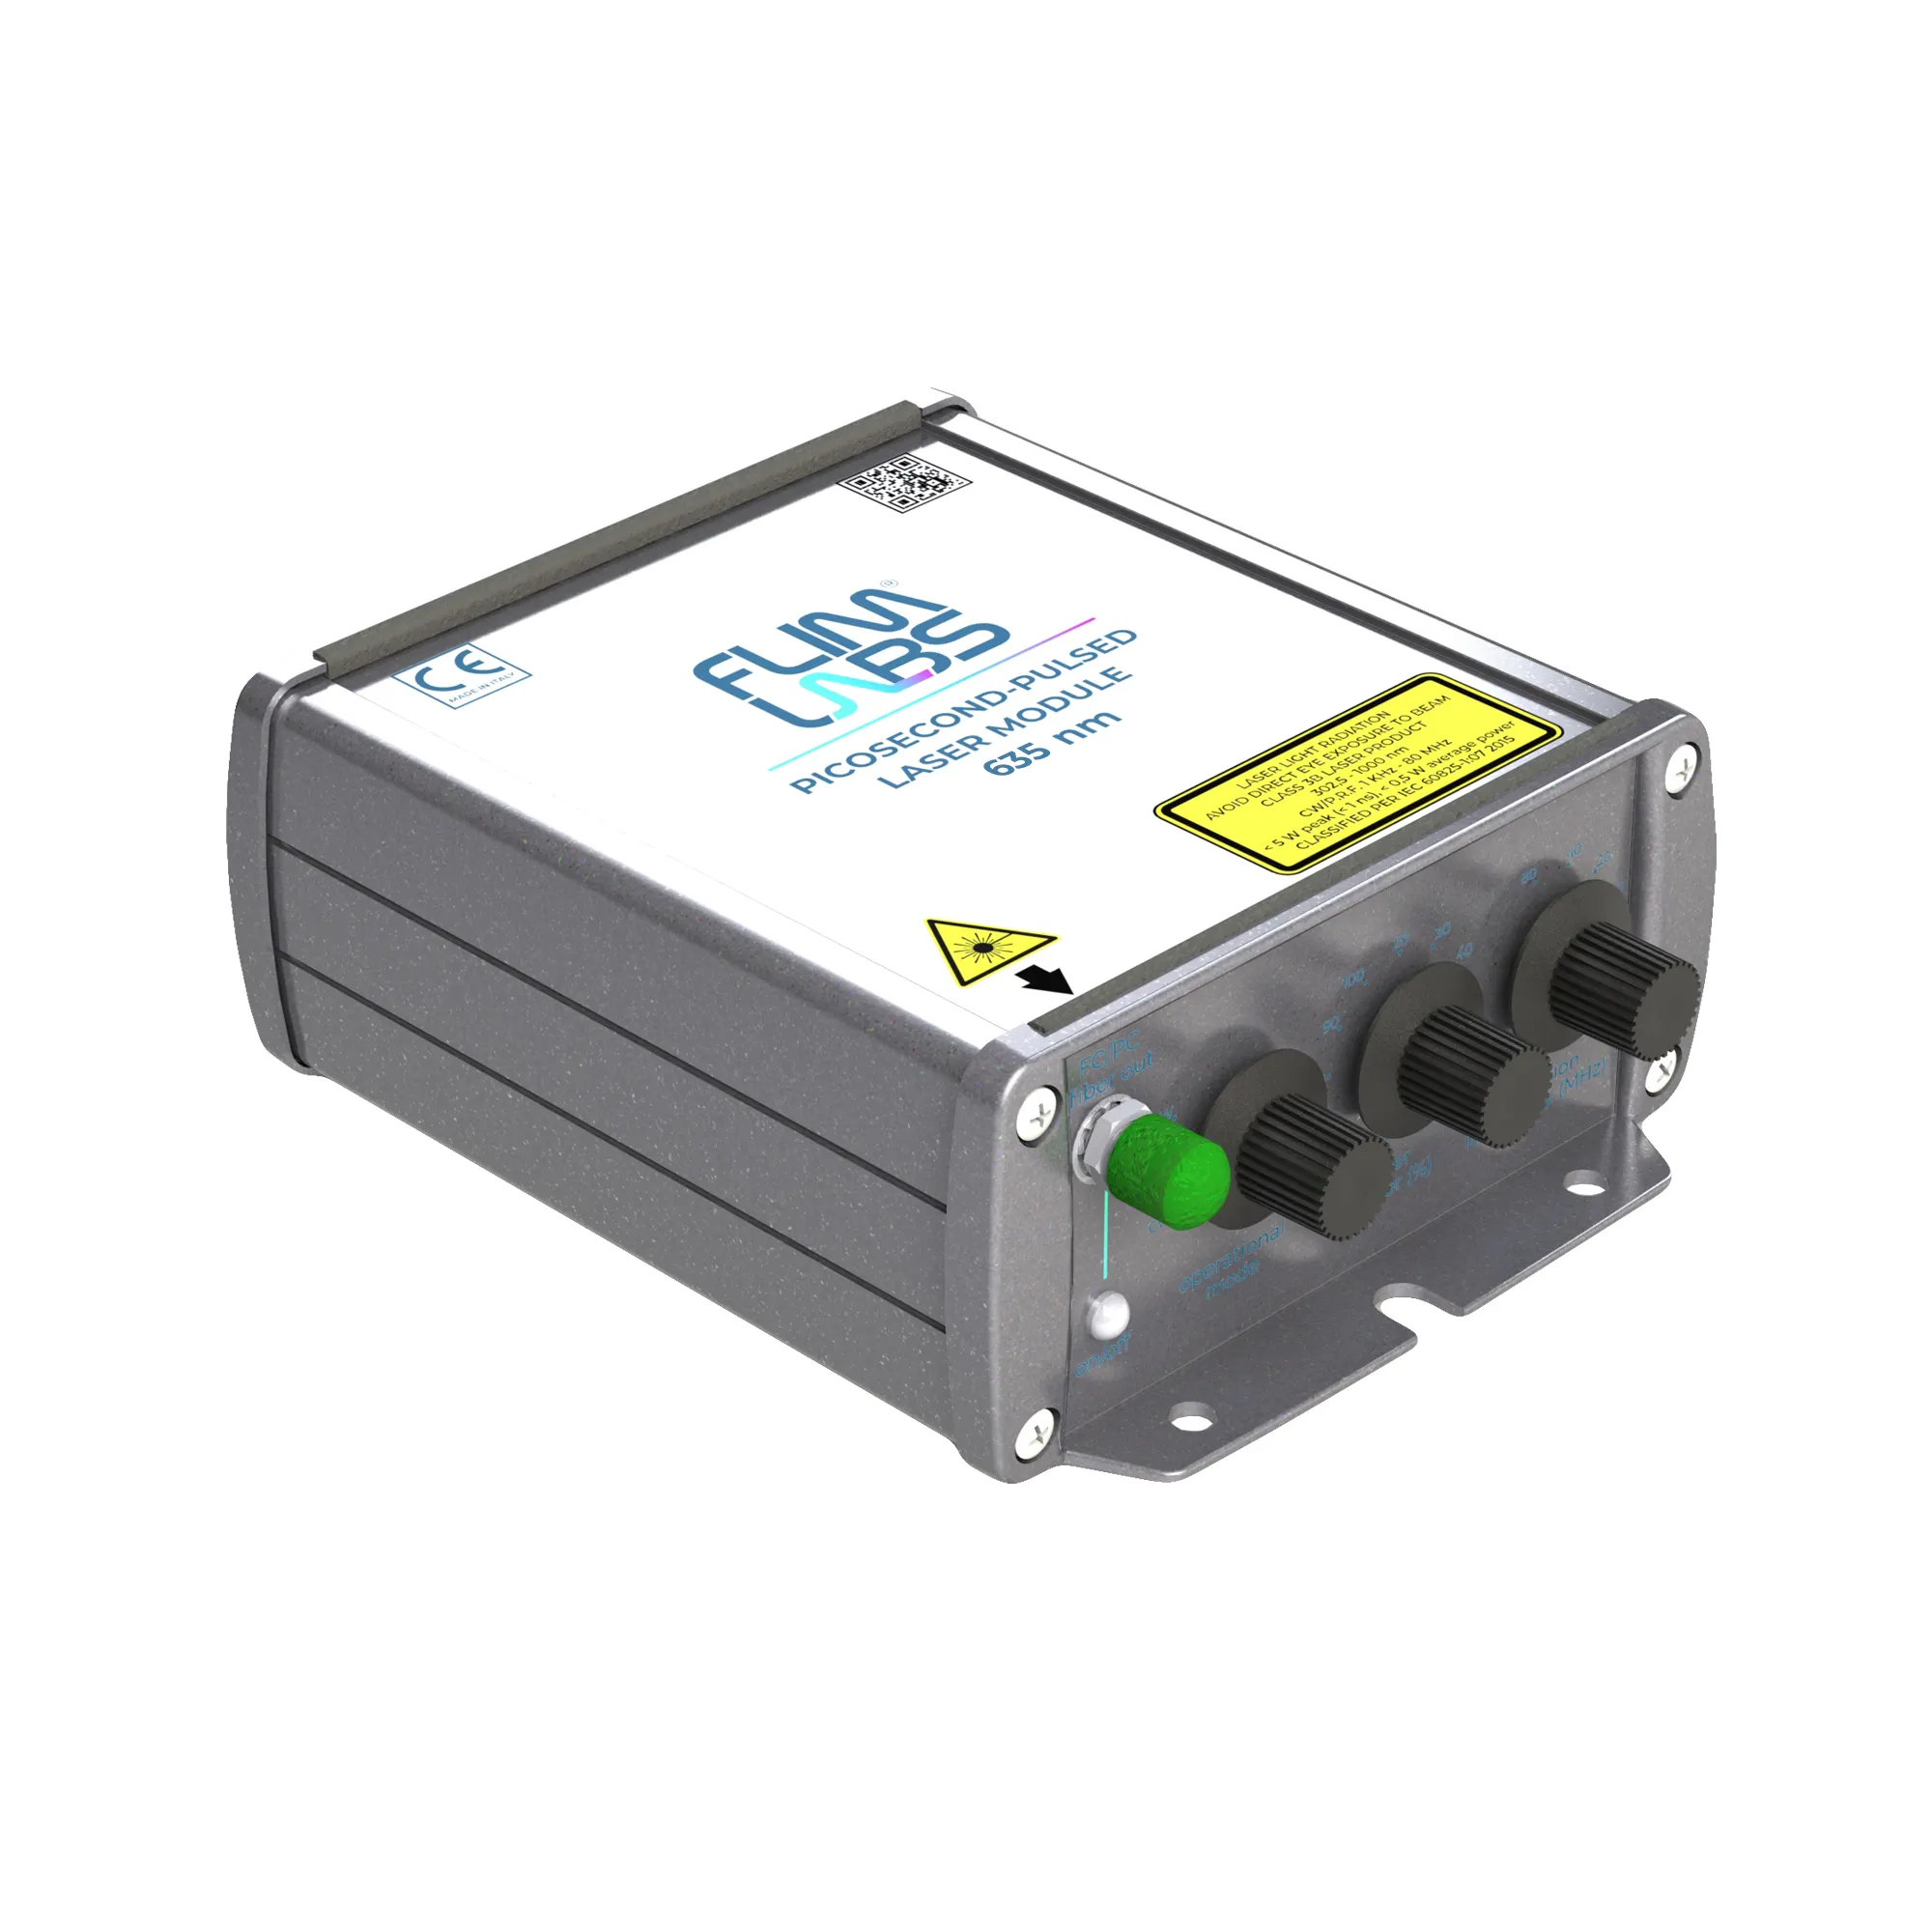 635 nm Fiber Coupled Picosecond Pulsed Laser Module Time Resolved Fluorescence Spectroscopy TCSPC